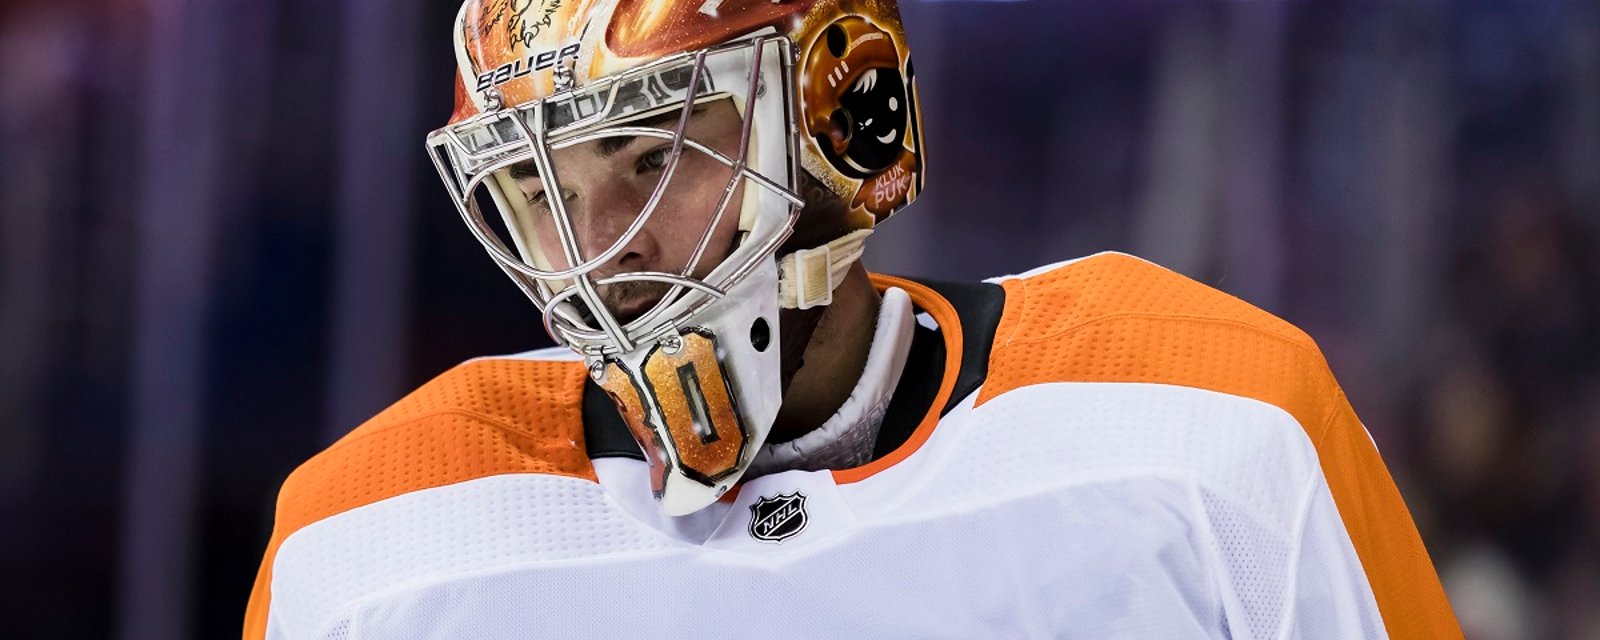 Report: Flyer headed back to Philadelphia with a mysterious injury.